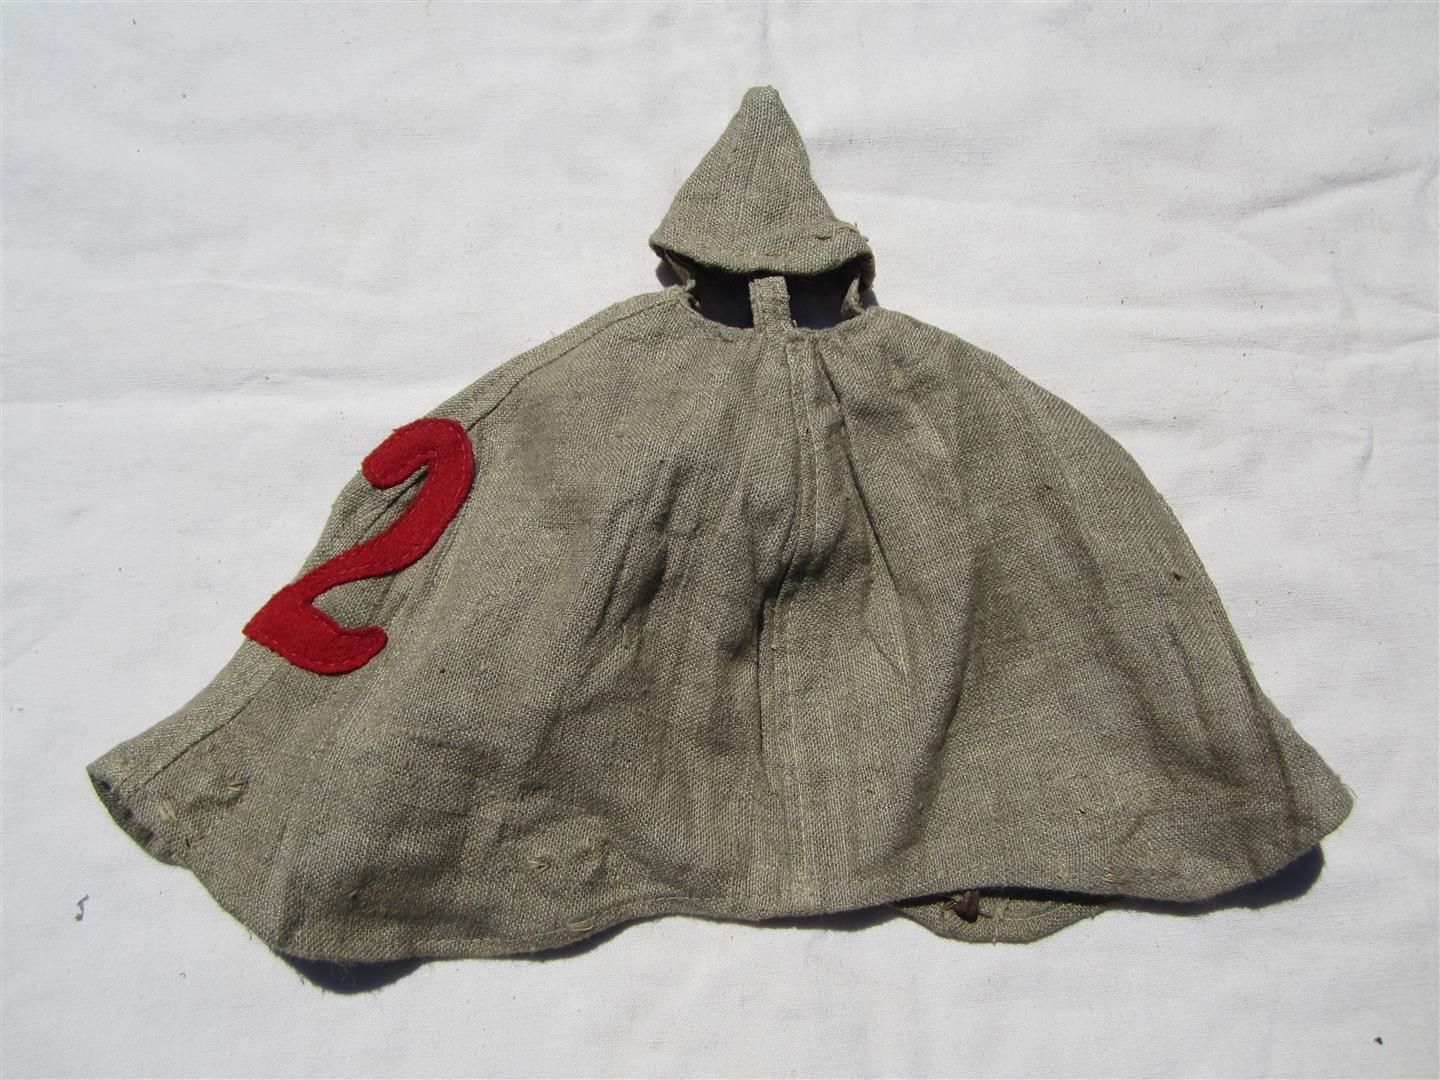 WW1 German Pikelhaube cover - Reproduction